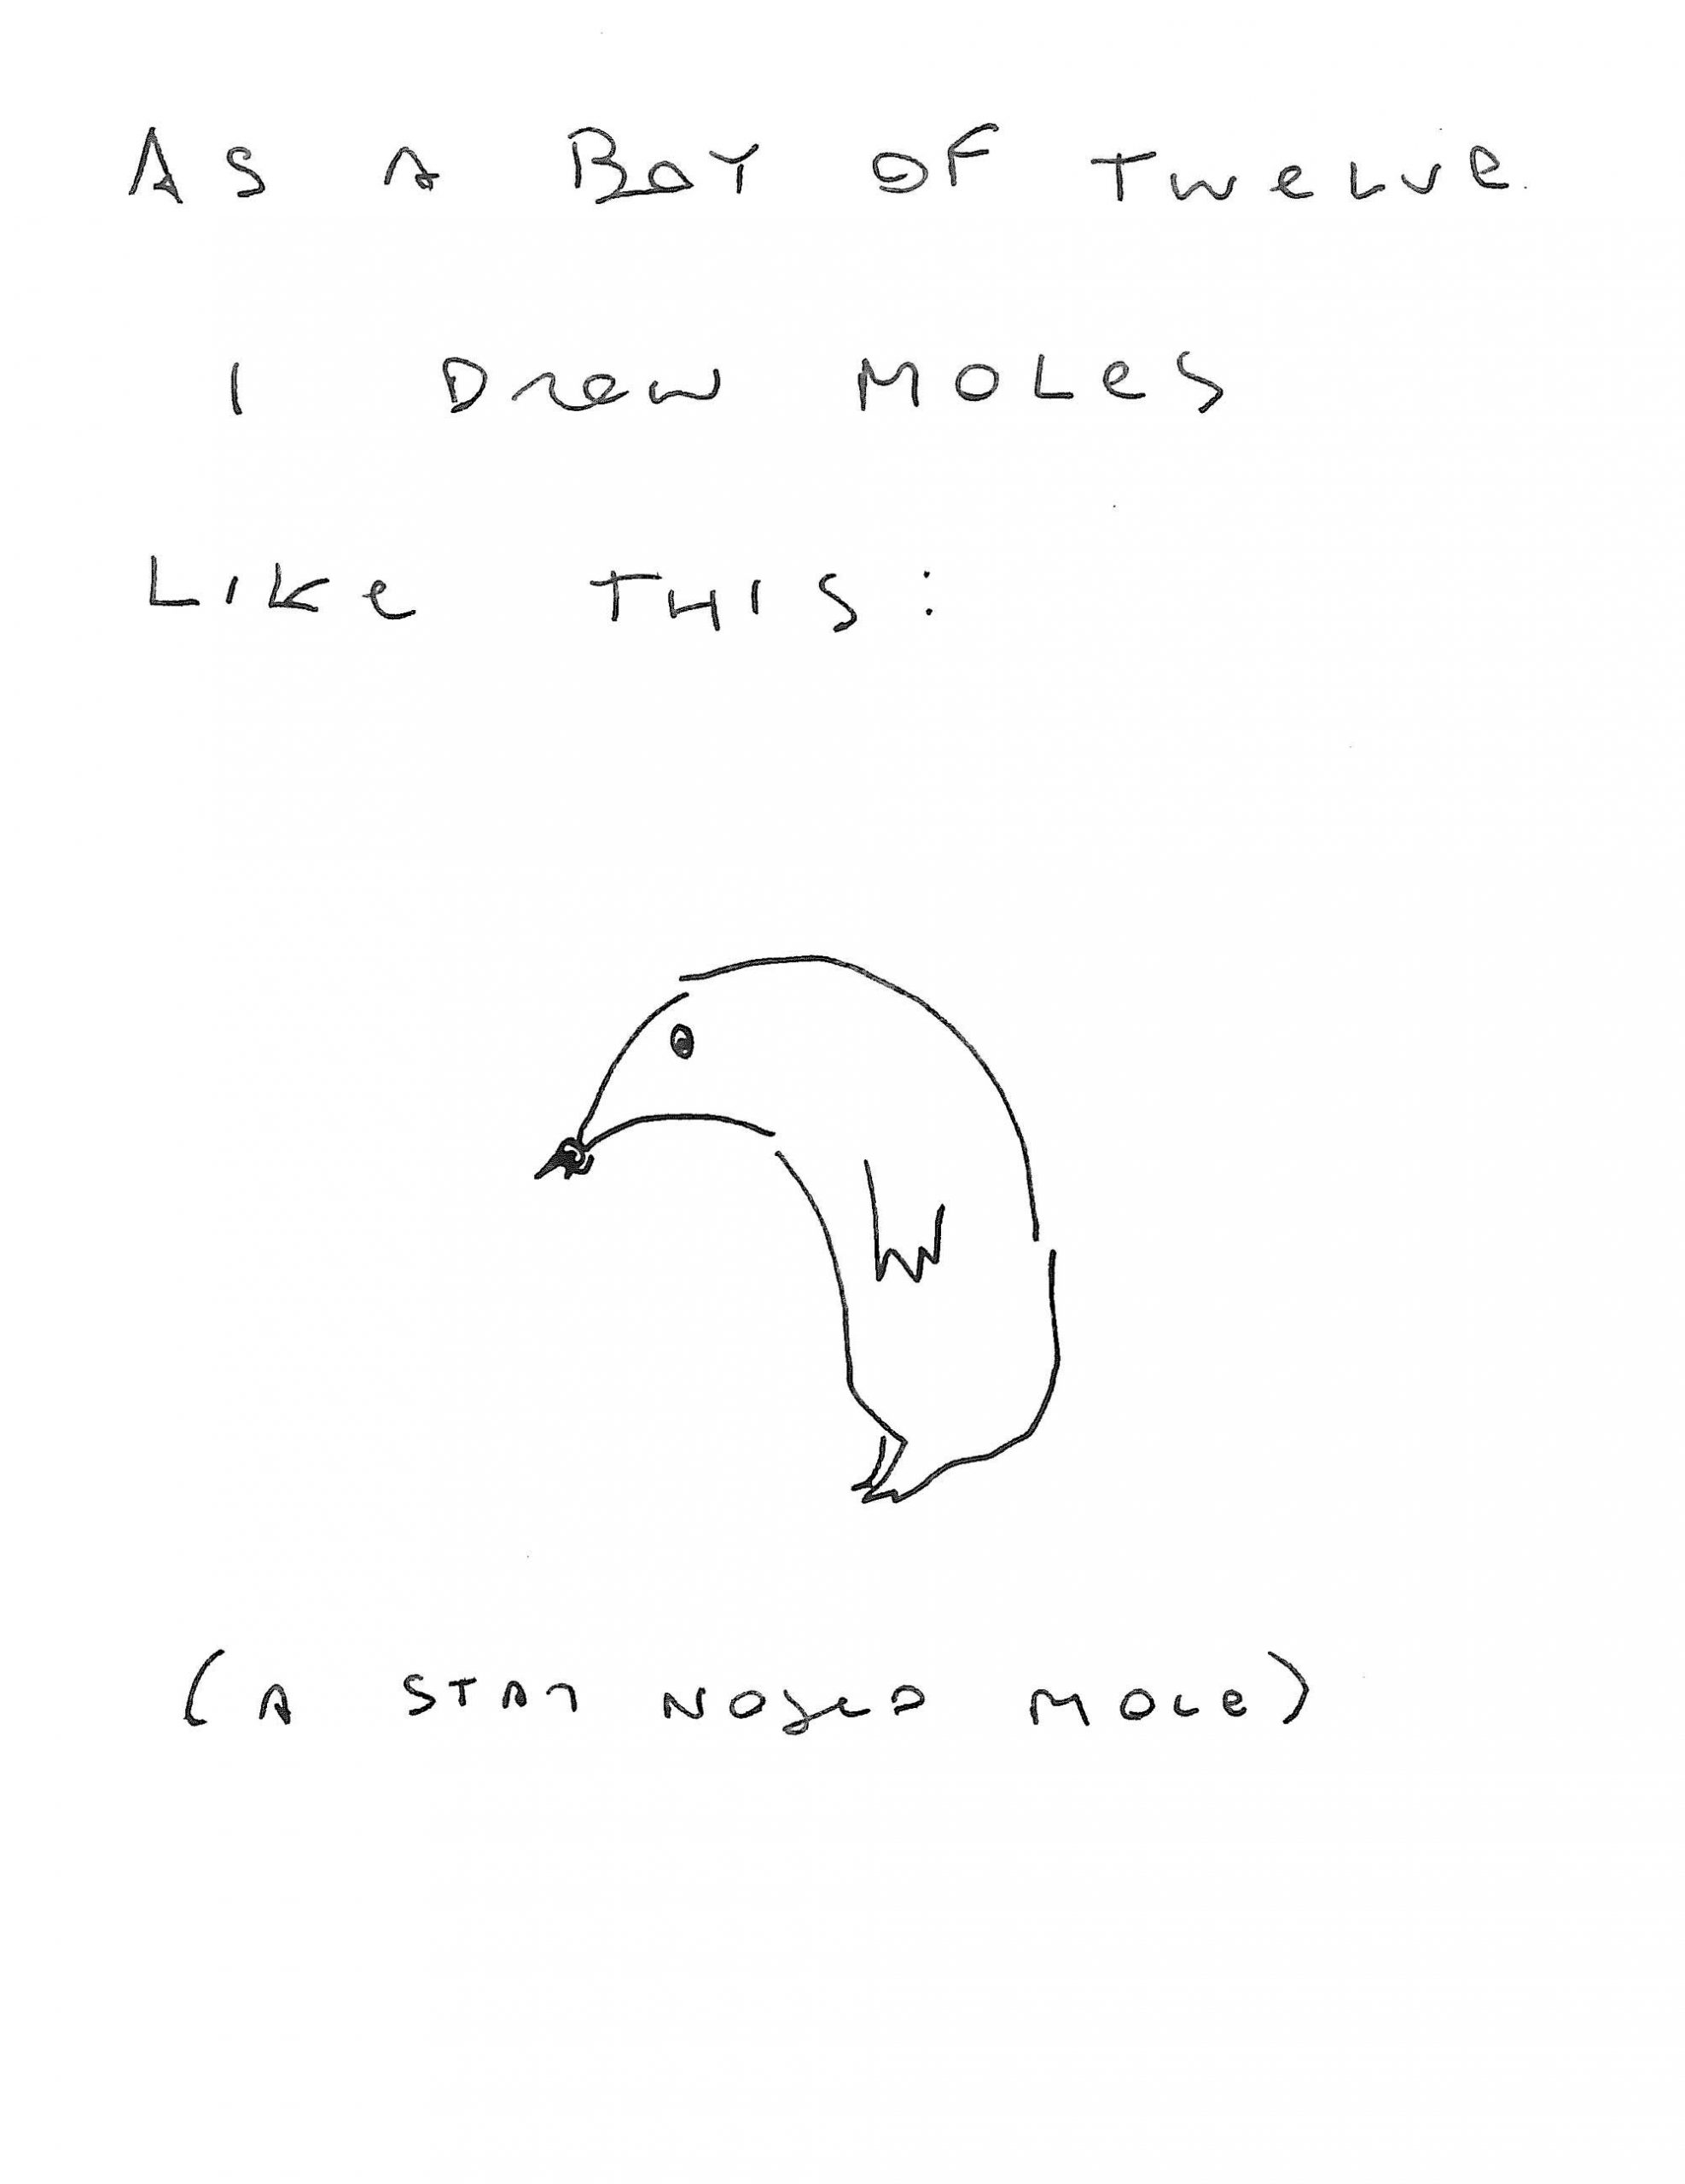 Jesse Ball | Drawings of Monsters | 4 mole